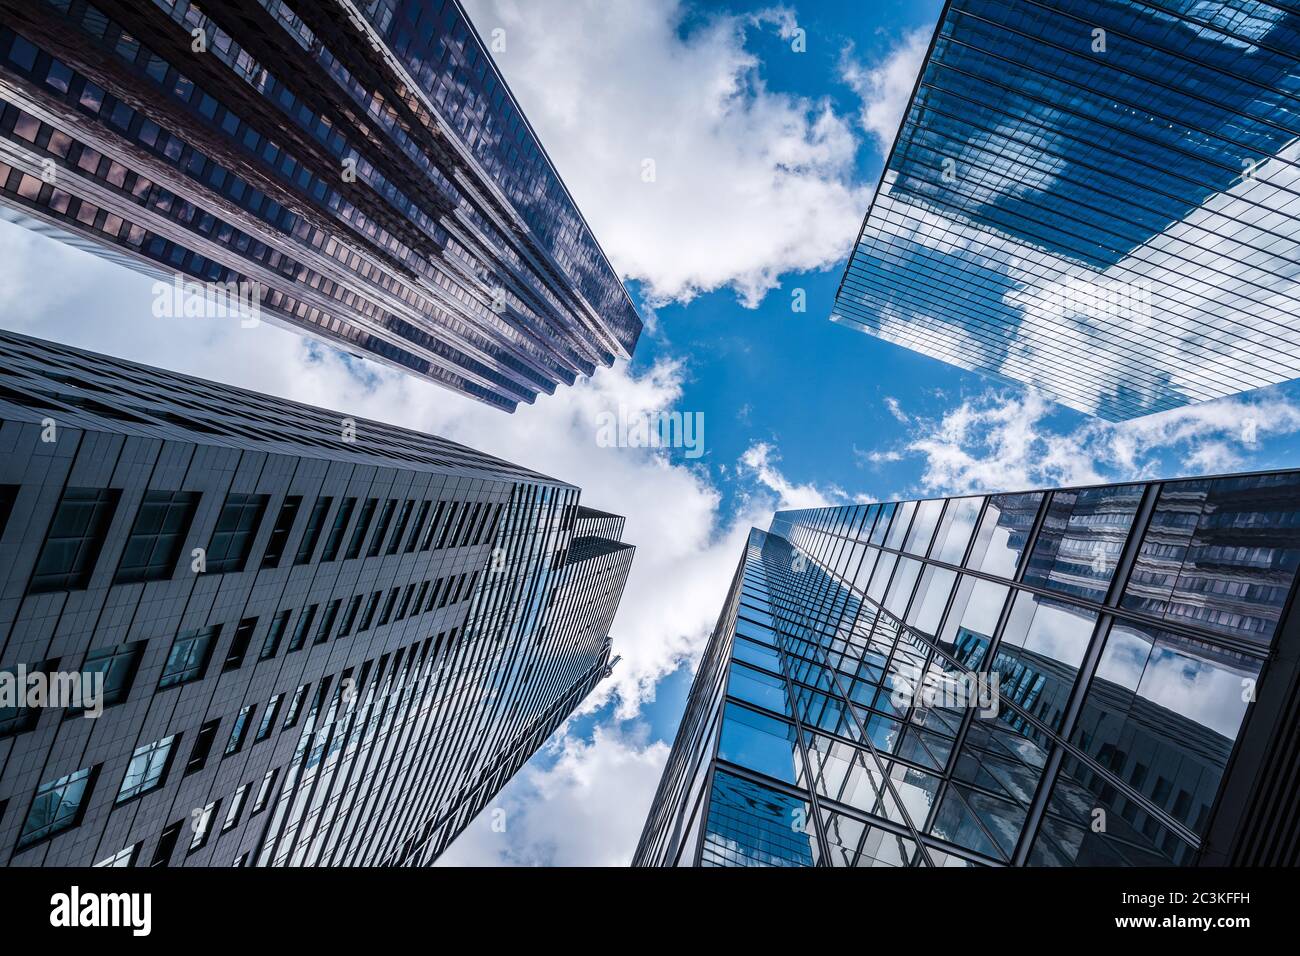 Business and finance concept, looking up at modern office building architecture in the financial district of Toronto, Ontario, Canada. Stock Photo